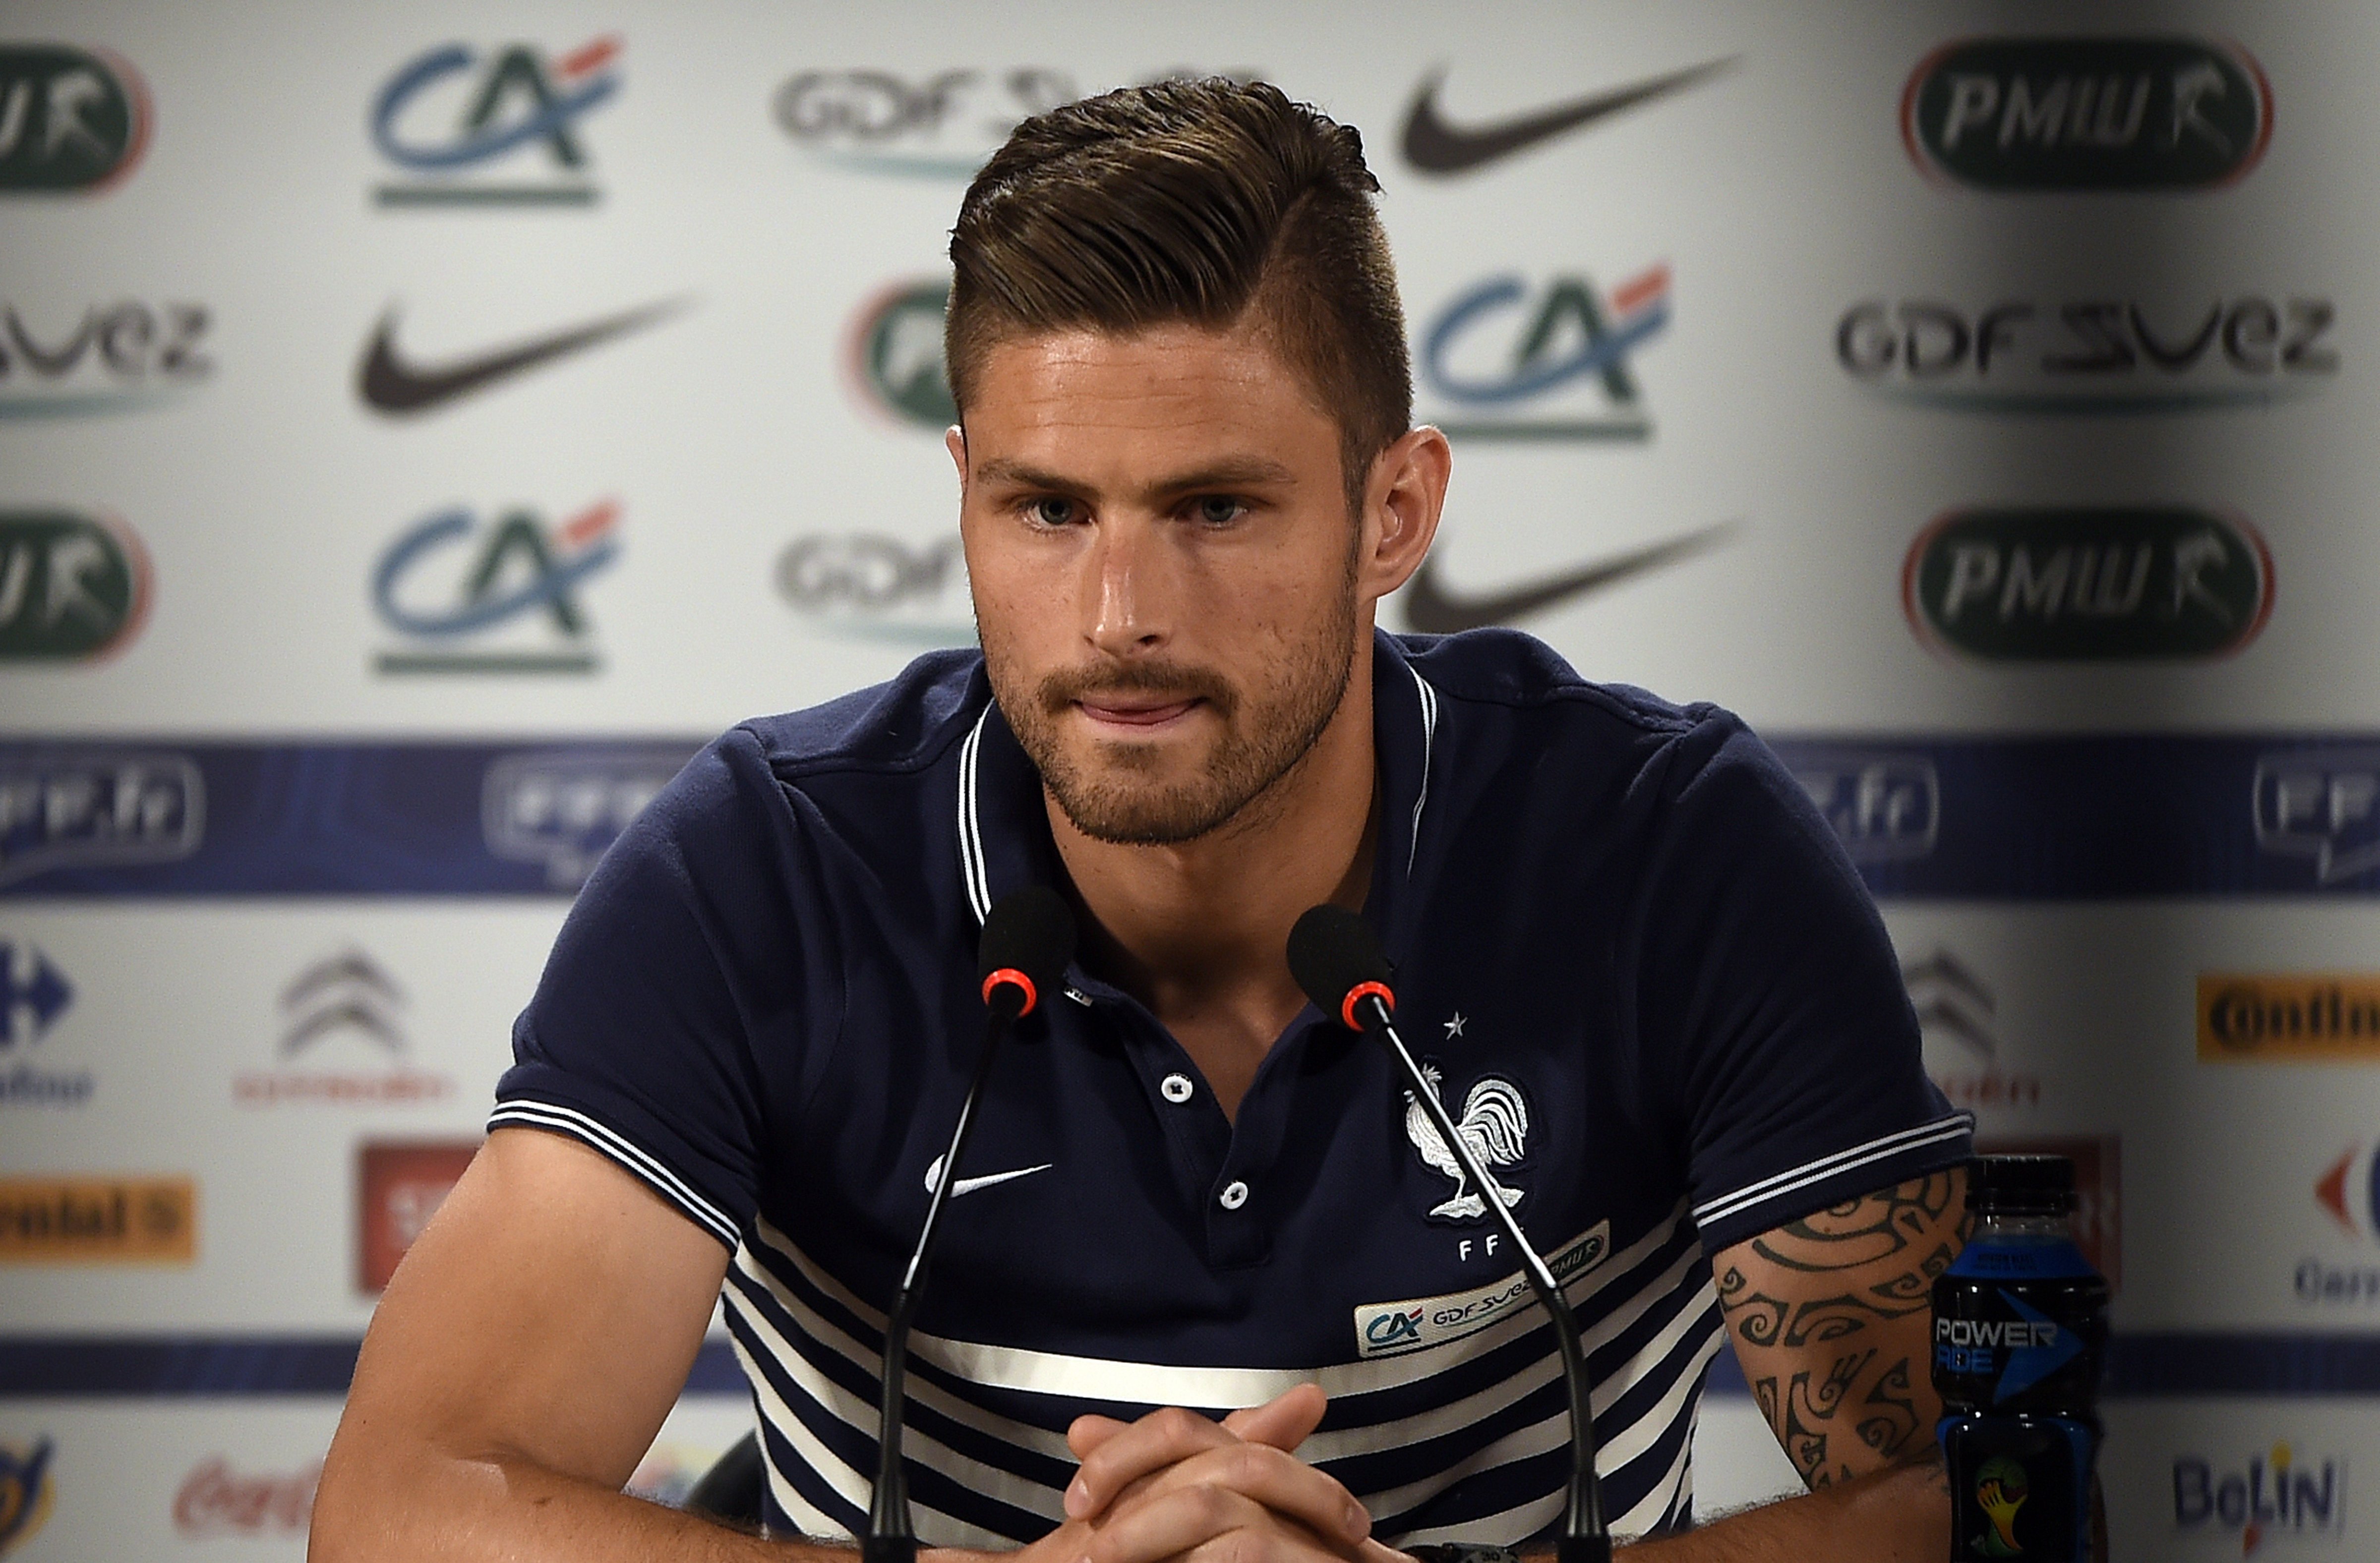 France's forward Olivier Giroud addresses a press conference at the theater in Ribeirao Prato on June 10, 2014, prior to the start of the 2014 FIFA World Cup in Brazil. (FRANCK FIFE—AFP/Getty Images)